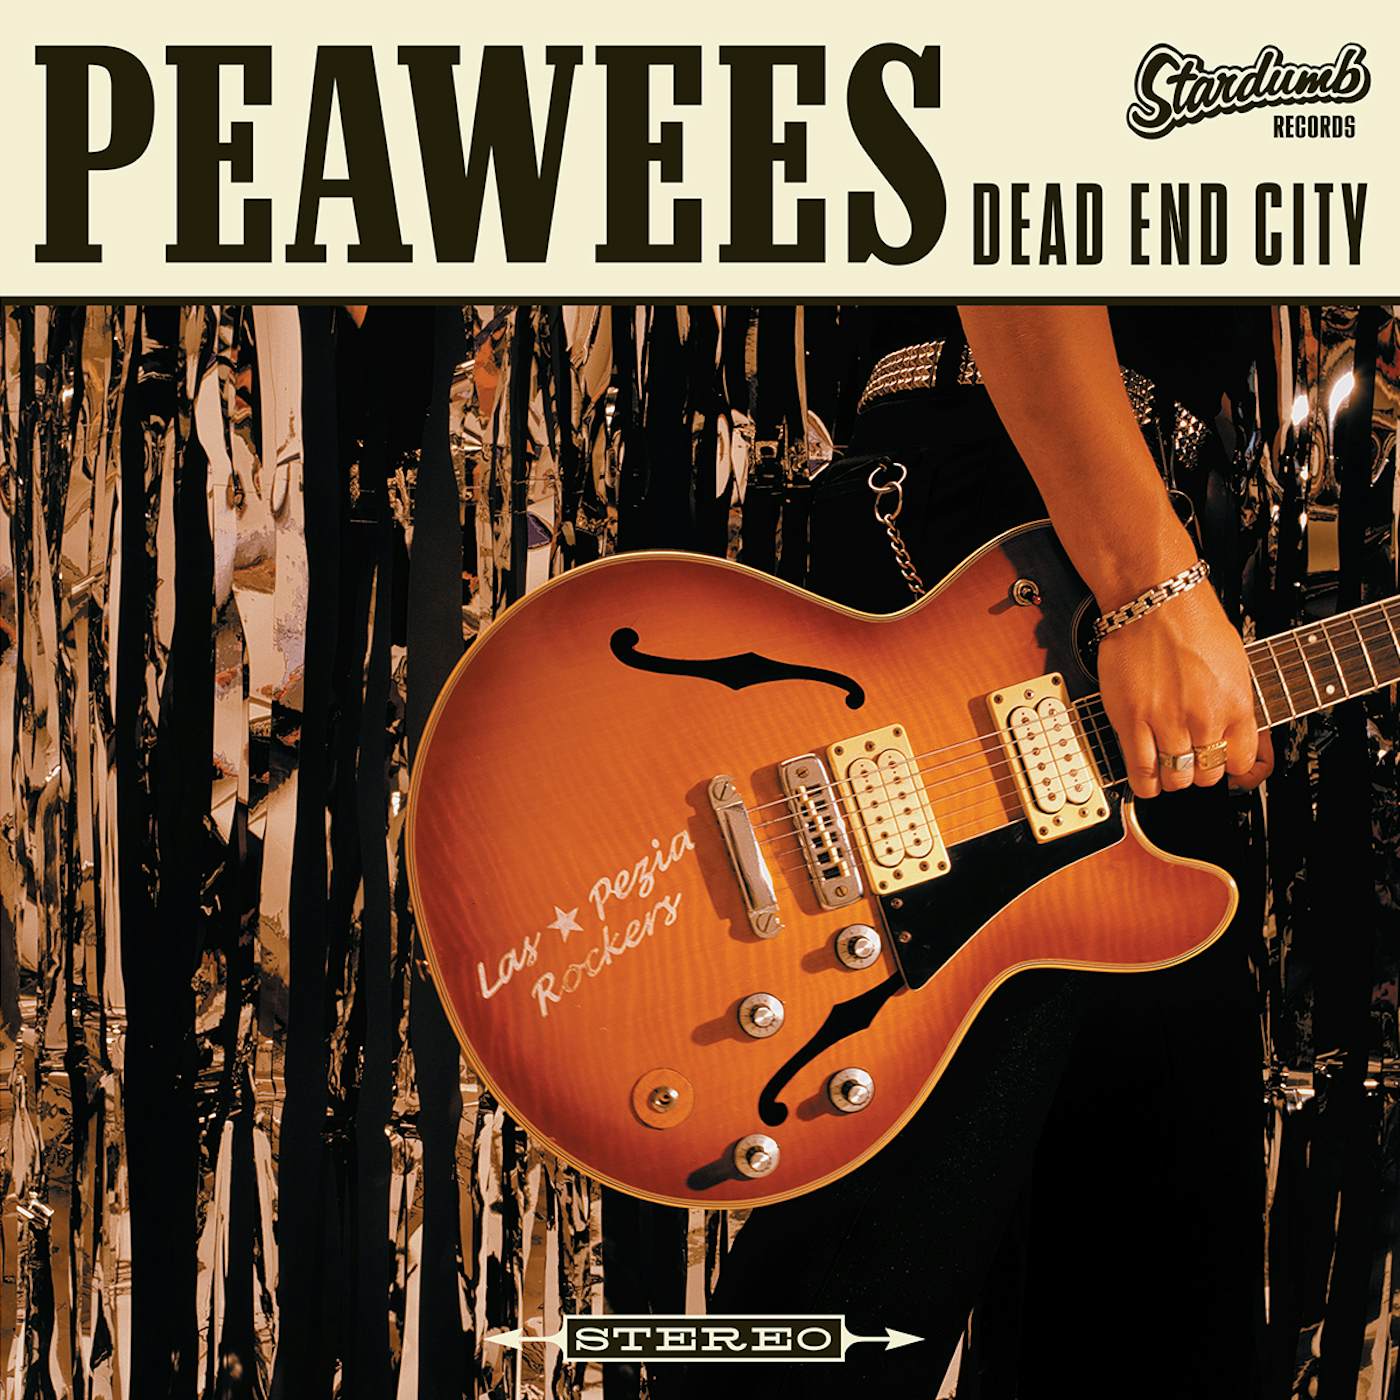 The Peawees Dead End City Vinyl Record